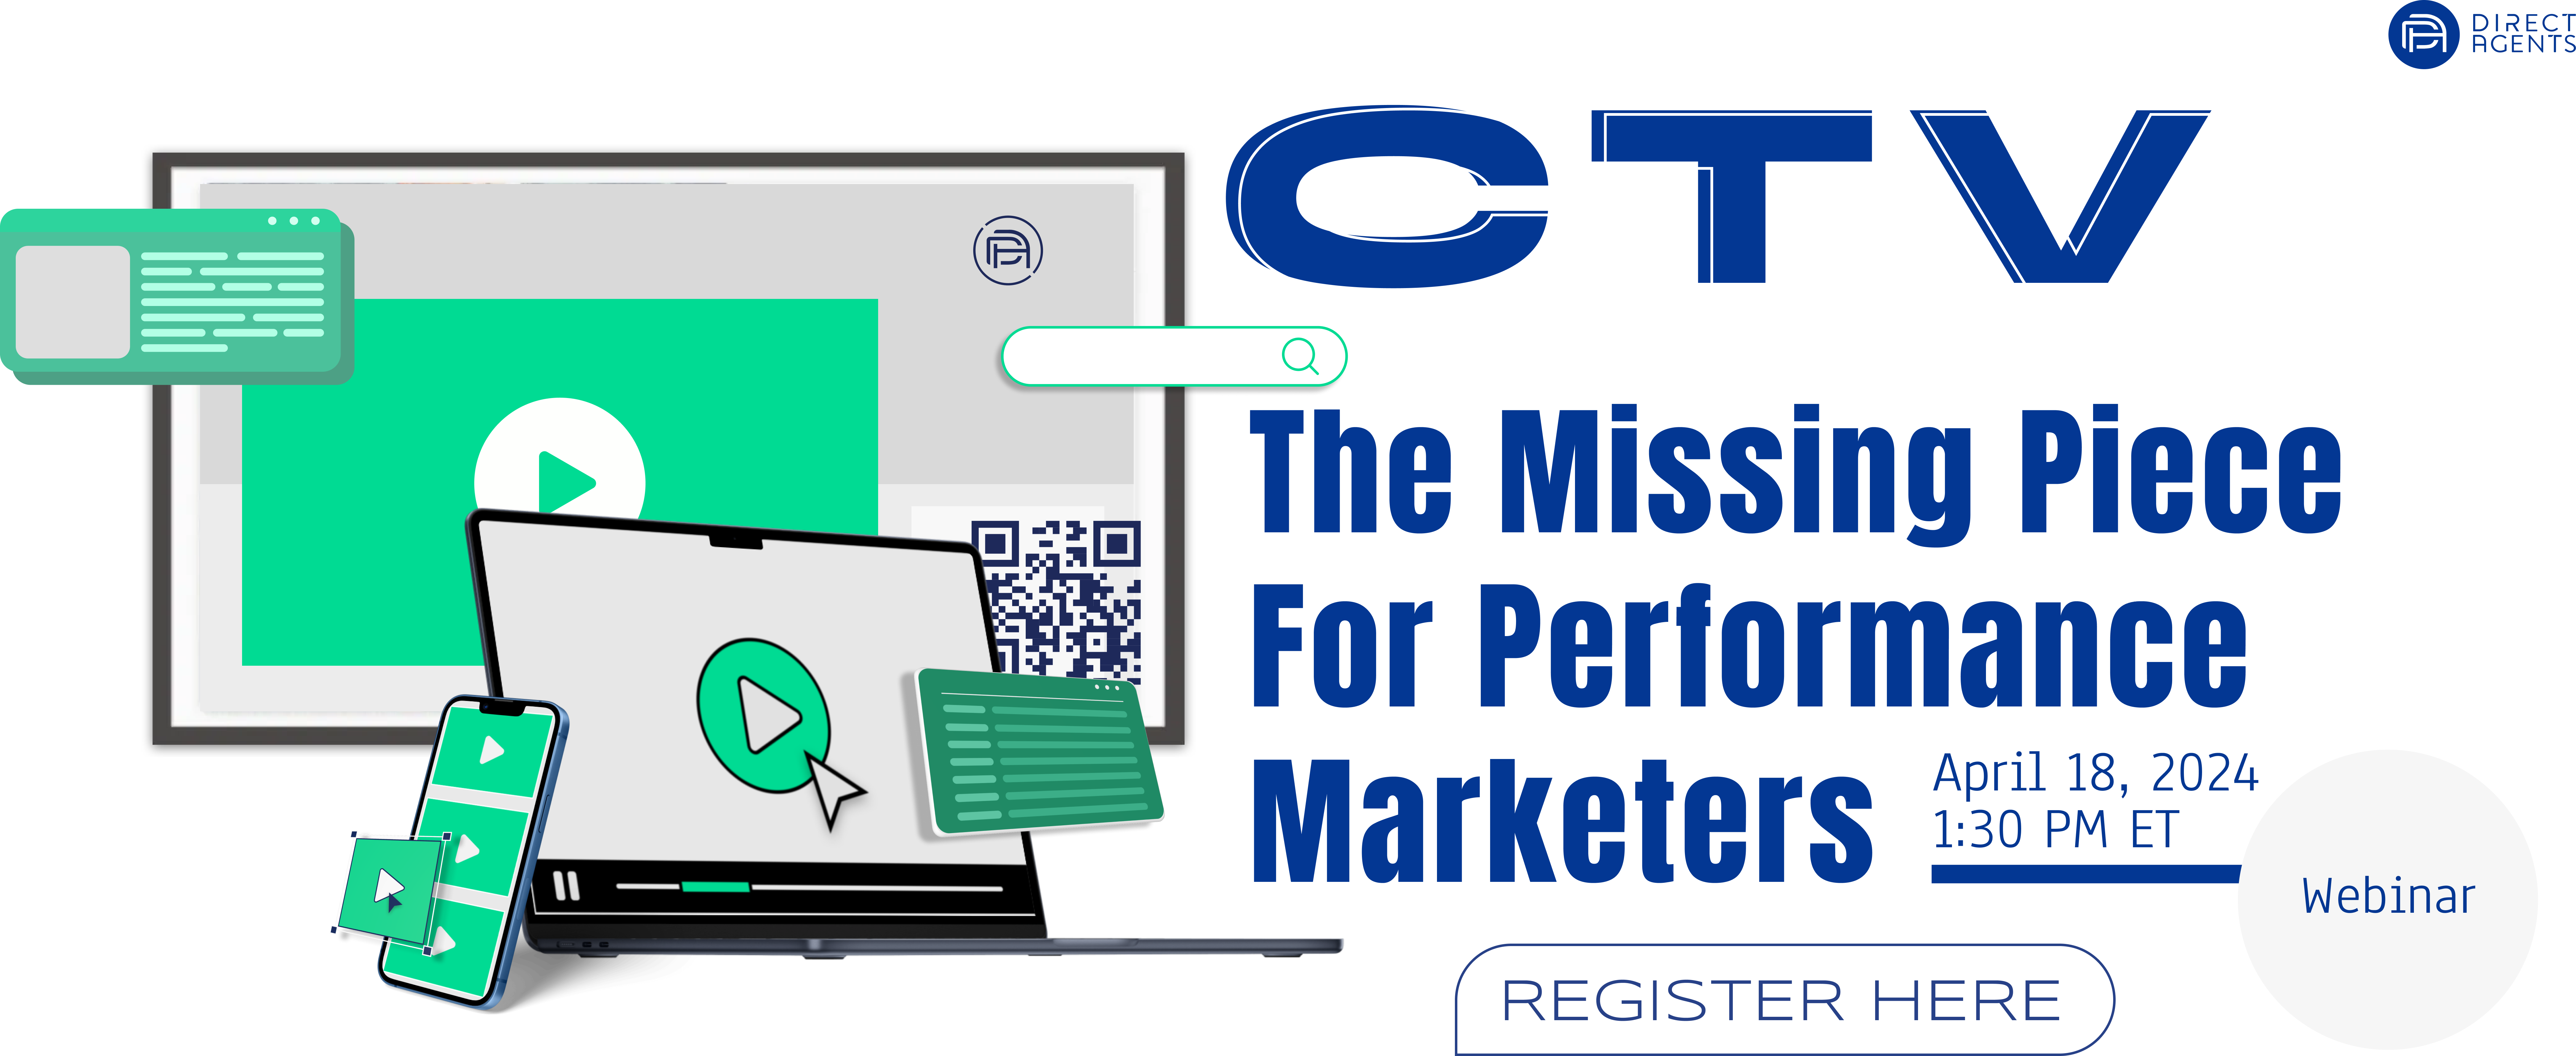 CTV: The Missing Piece for Performance Marketers Webinar